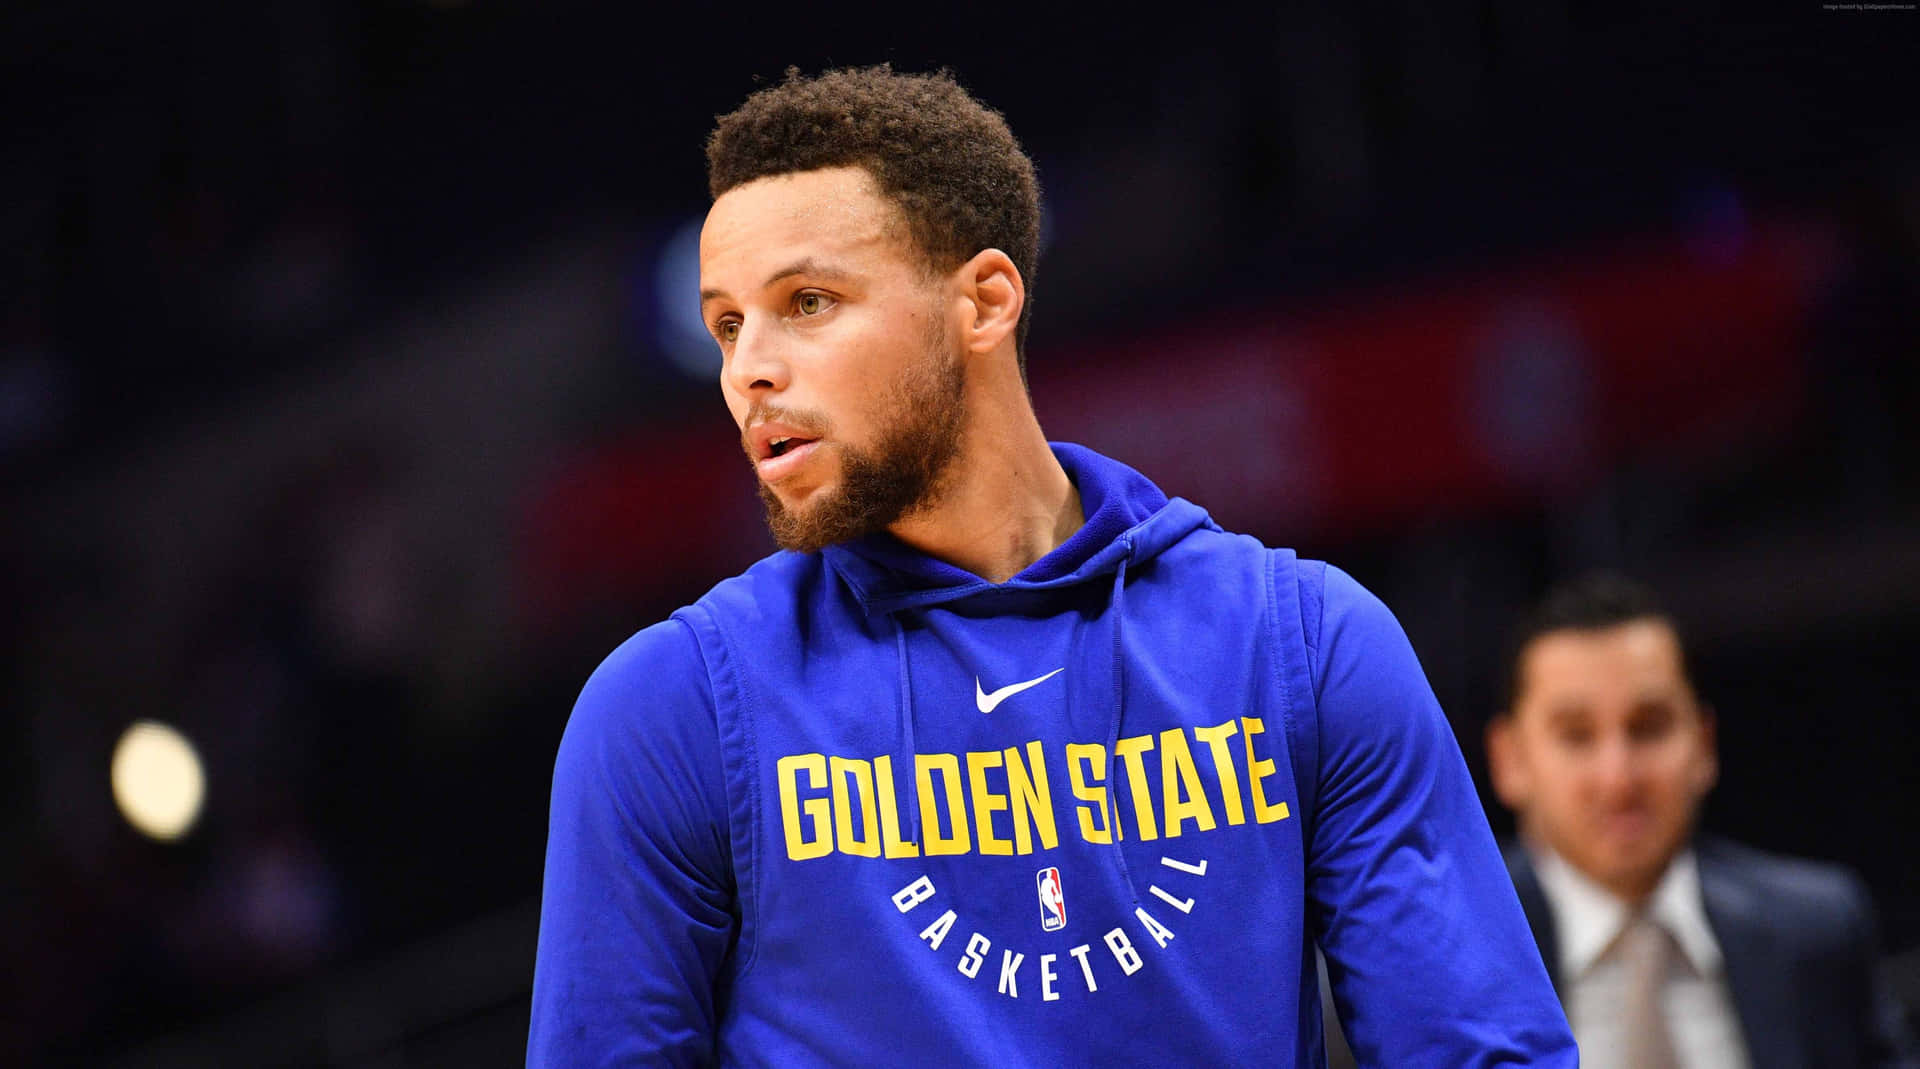 Steph Curry, the leader of the Golden State Warriors